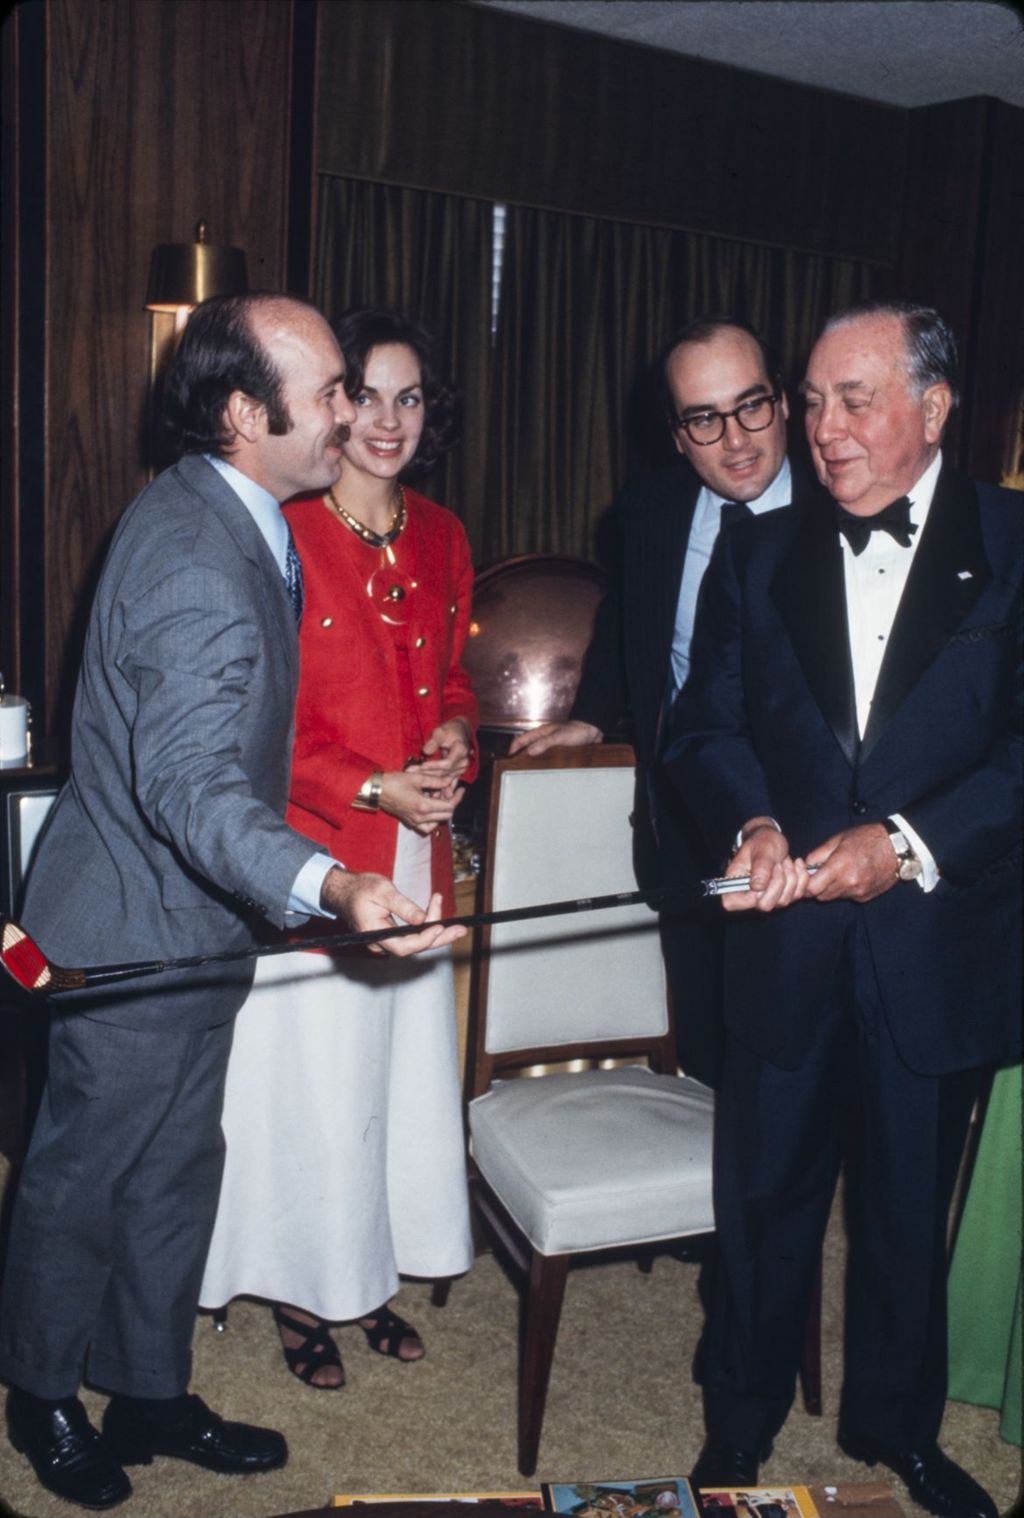 Miniature of Richard J. Daley's 72nd birthday party